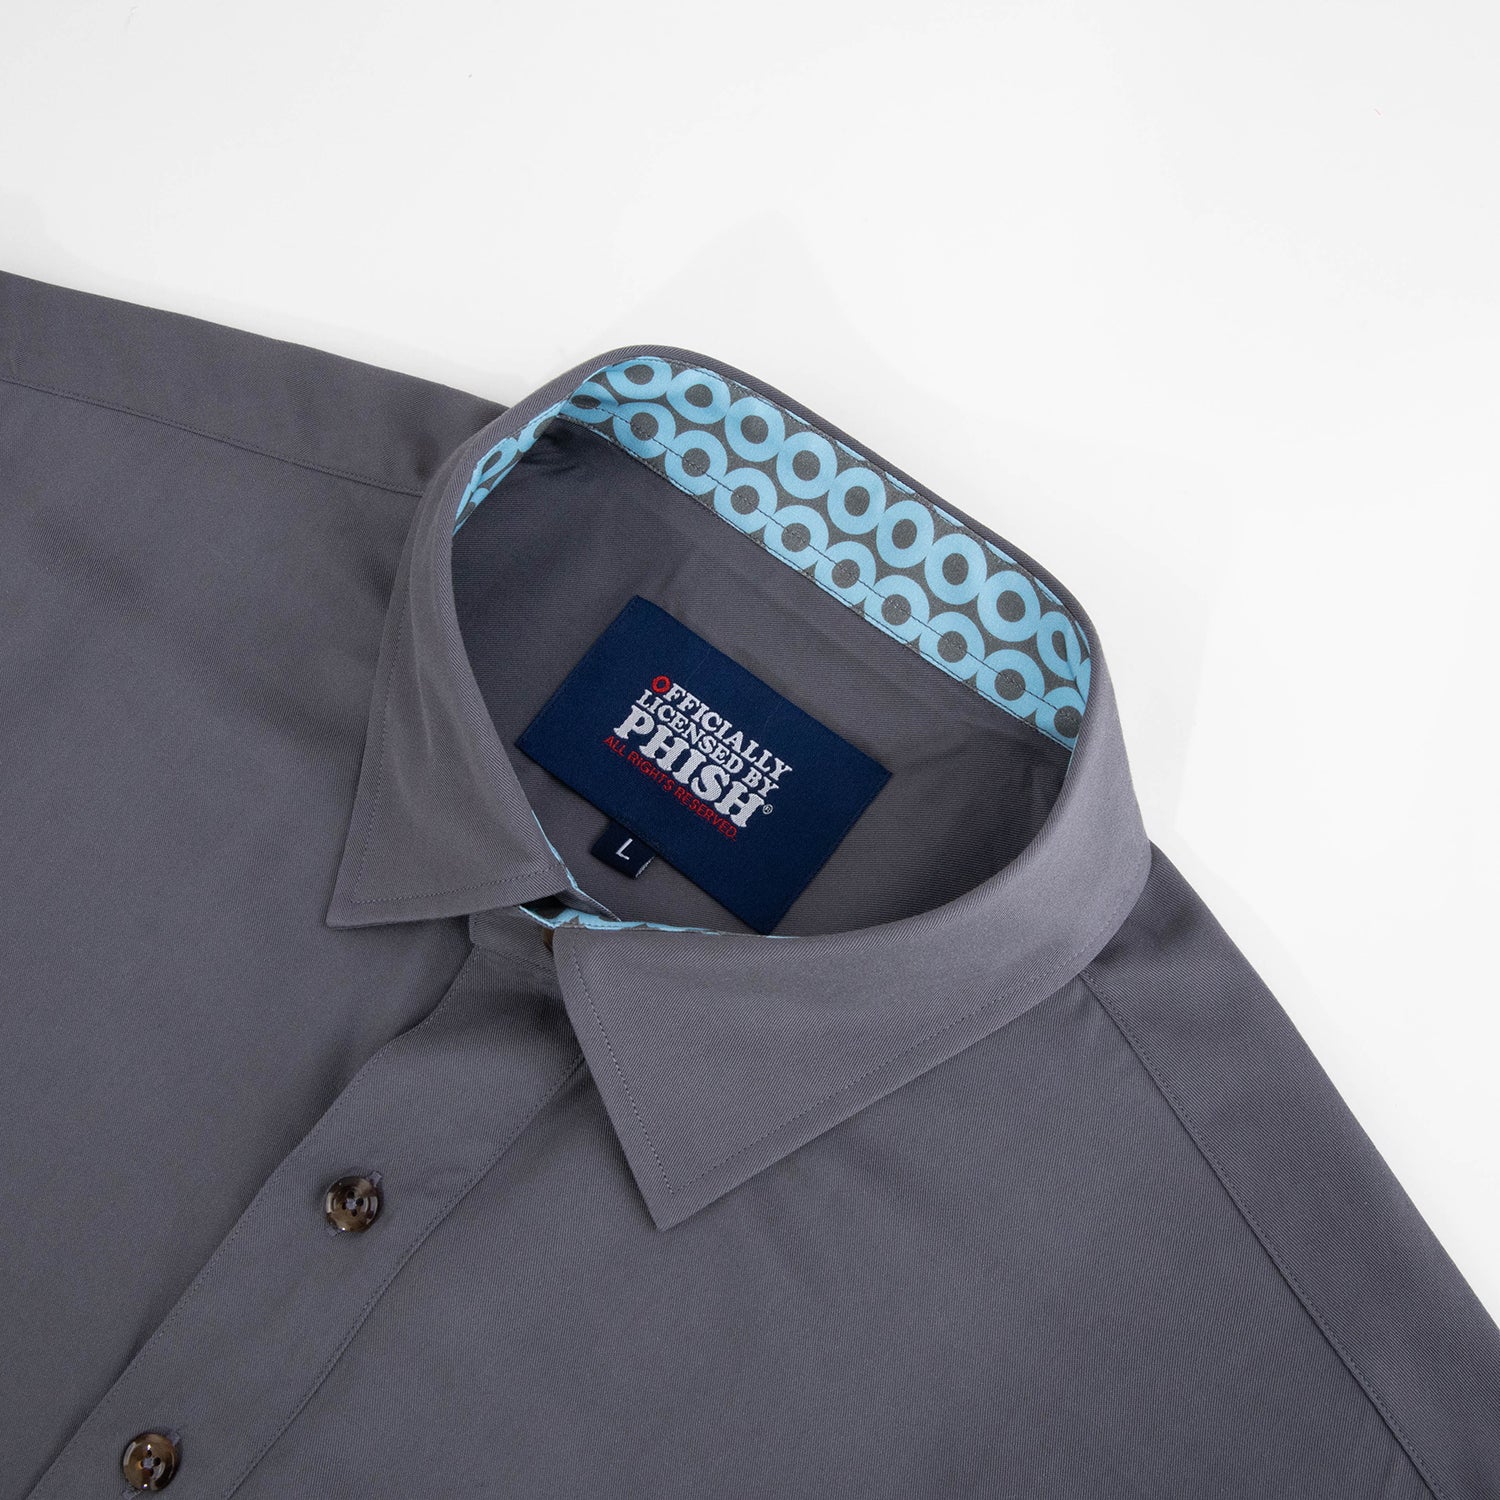 Phish Relaxed Short Sleeve Button Down Teal Donut in Grey - Section 119